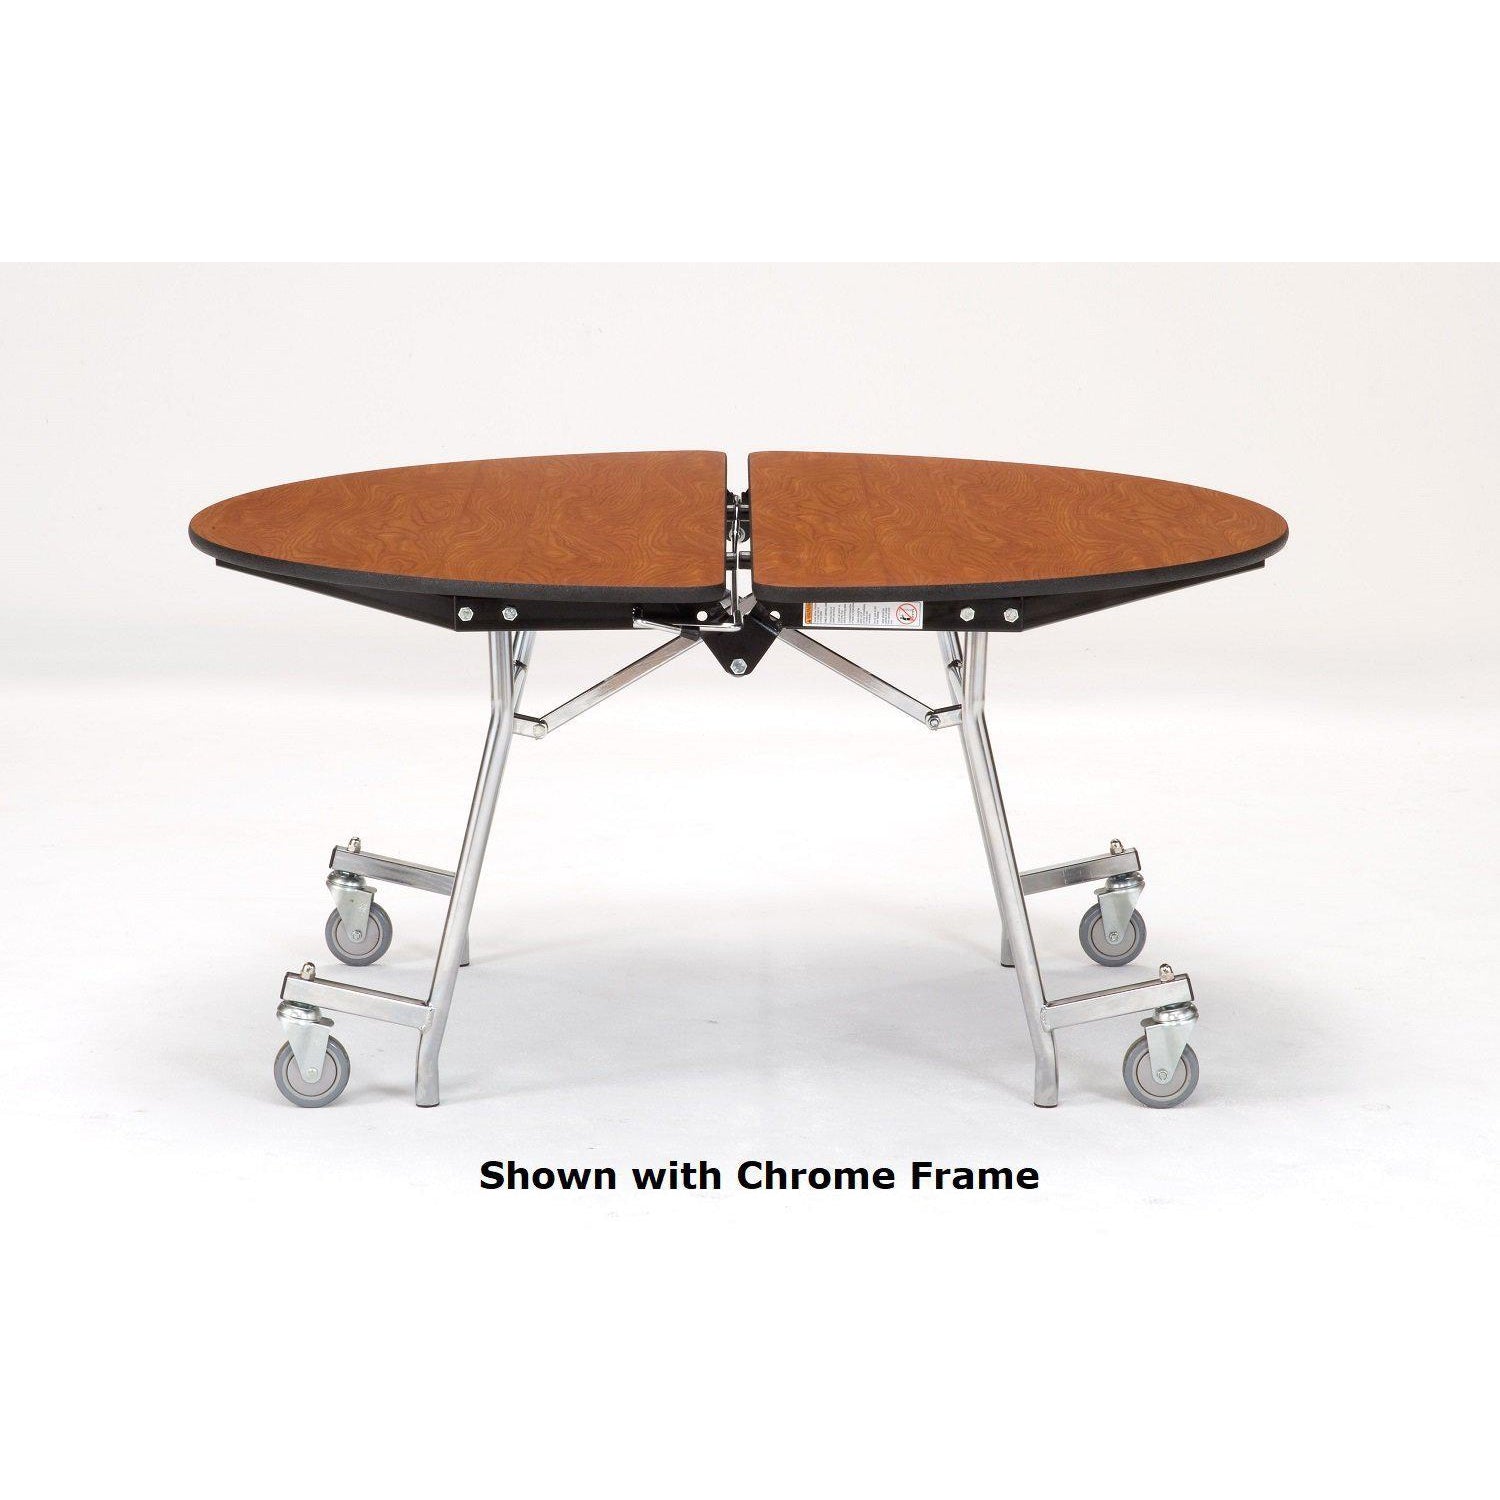 Mobile Shape Cafeteria Table, 72" Round, Plywood Core, Vinyl T-Mold Edge, Chrome Frame